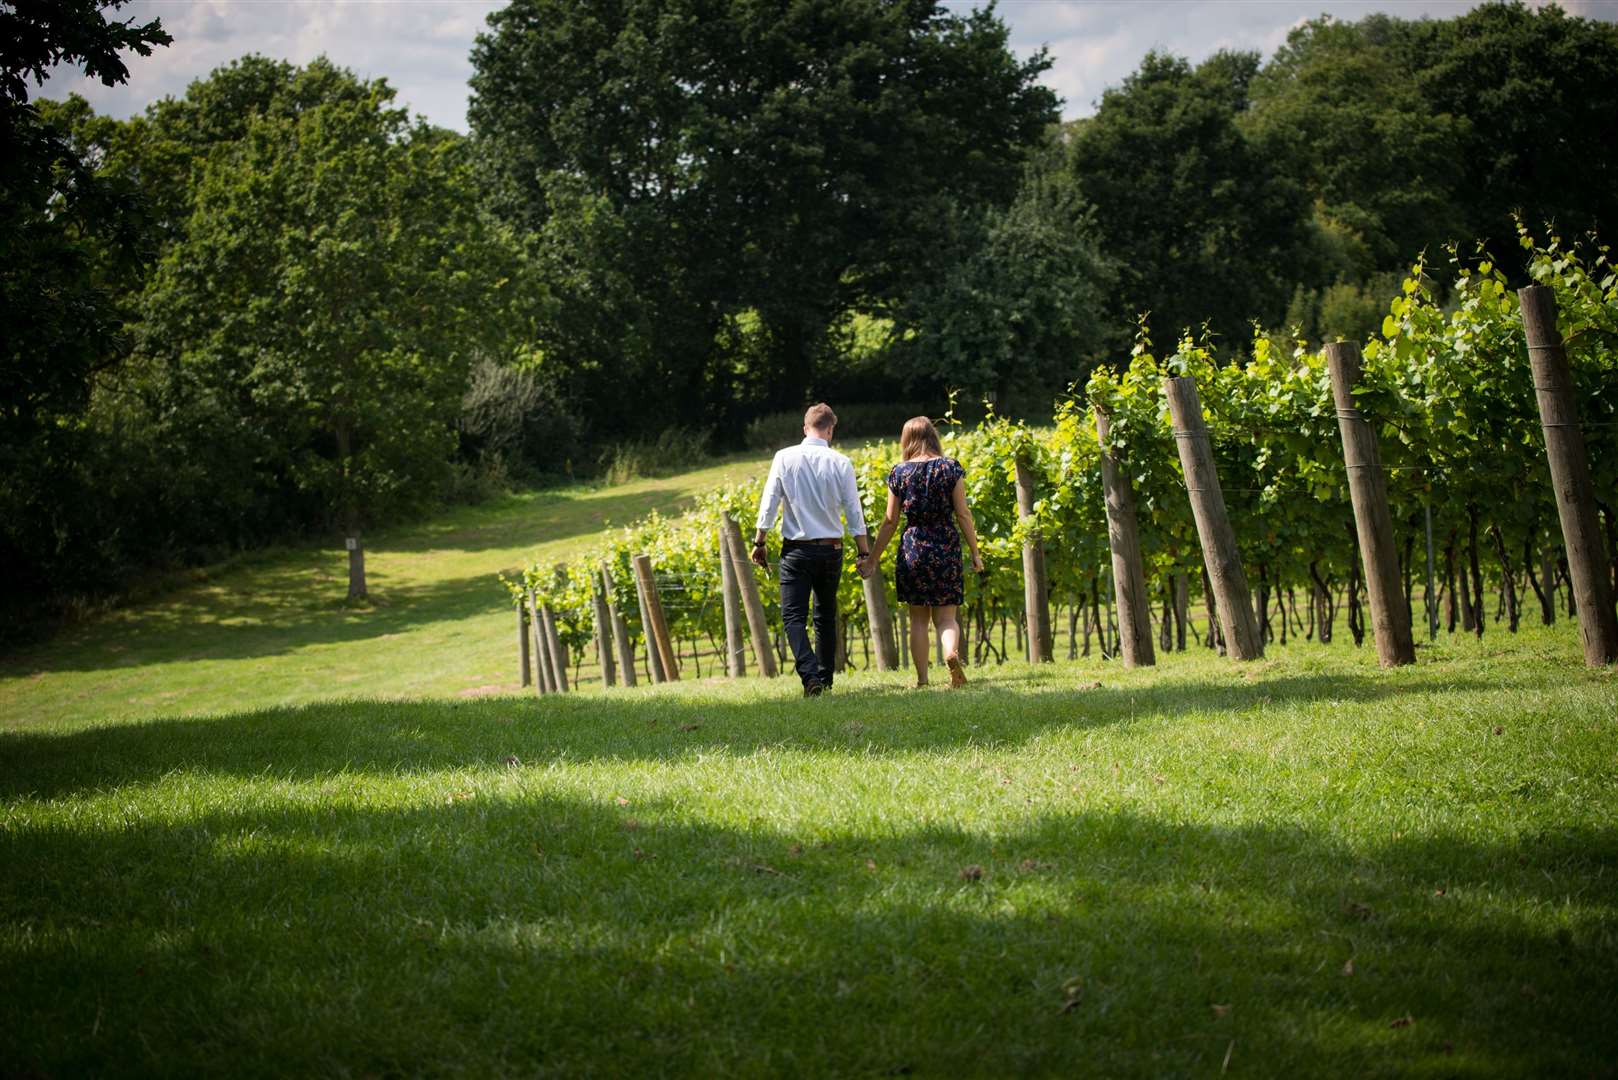 Chapel Down has won several awards for its English wines.  Image: Chris Gale/Storm Studios